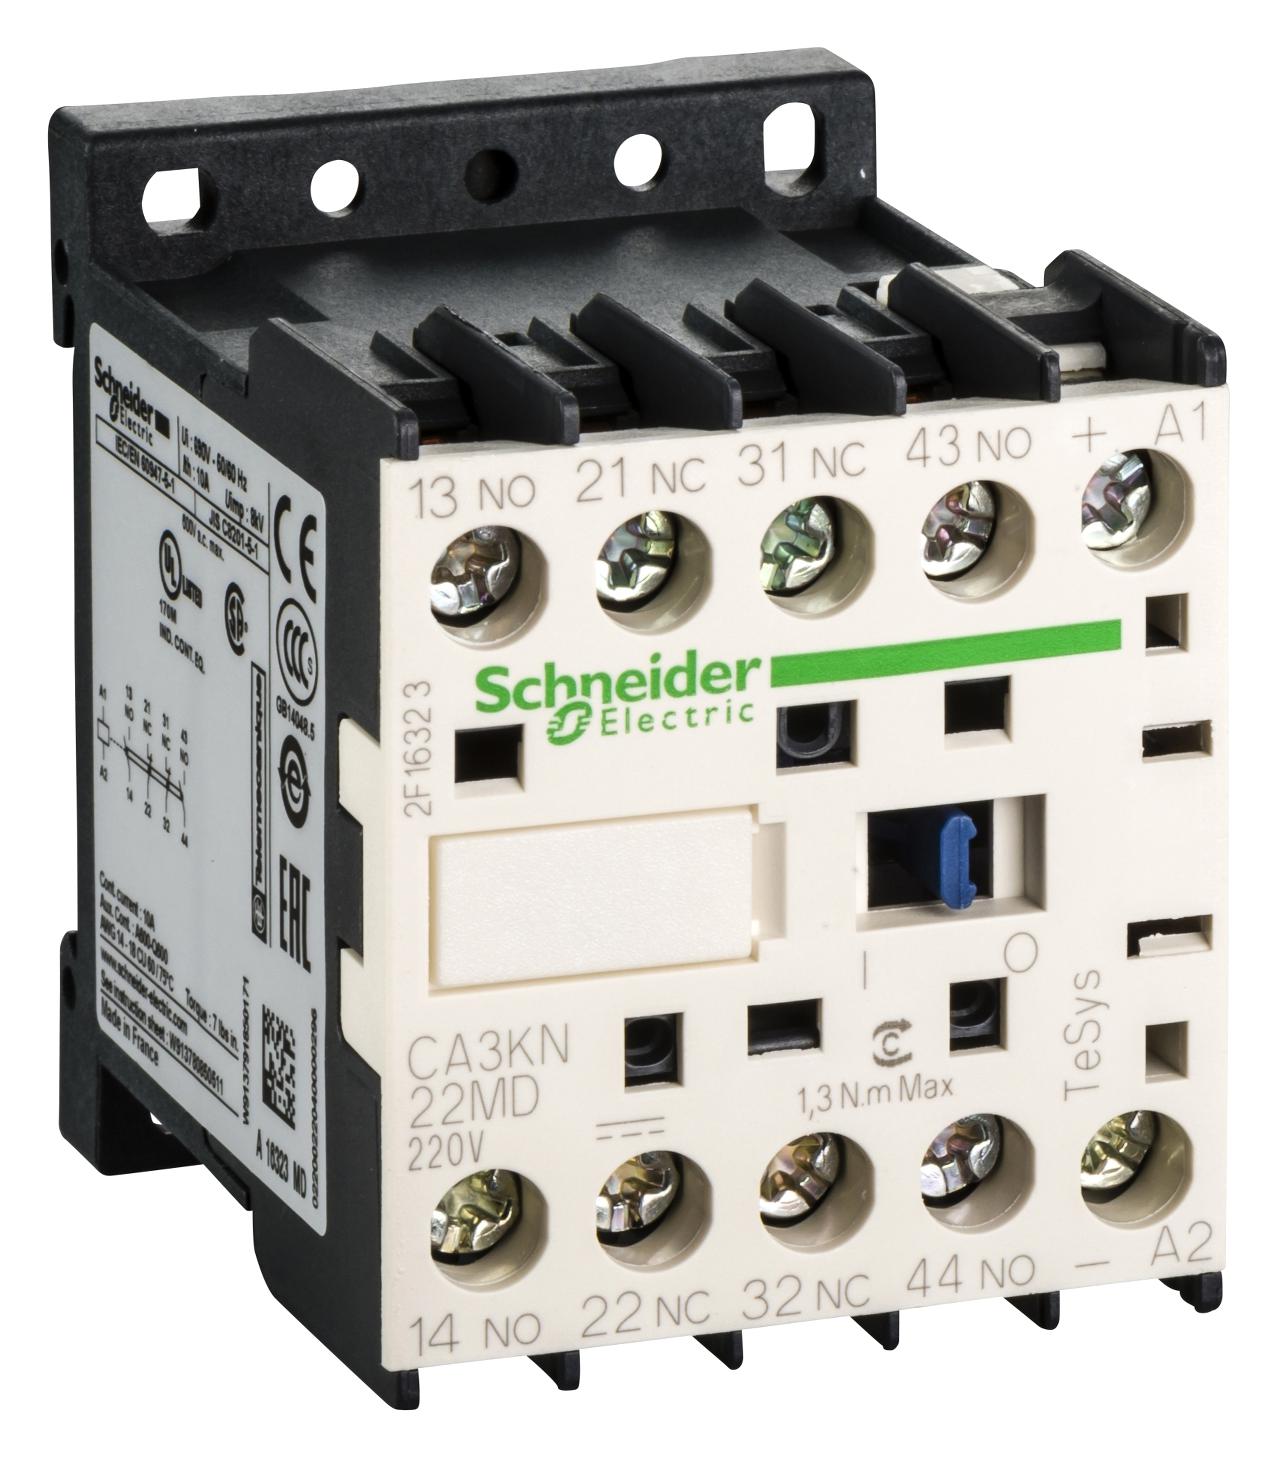 CA3KN22MD CONTROL RELAY 2NO 2NC CONTACTS SCHNEIDER ELECTRIC